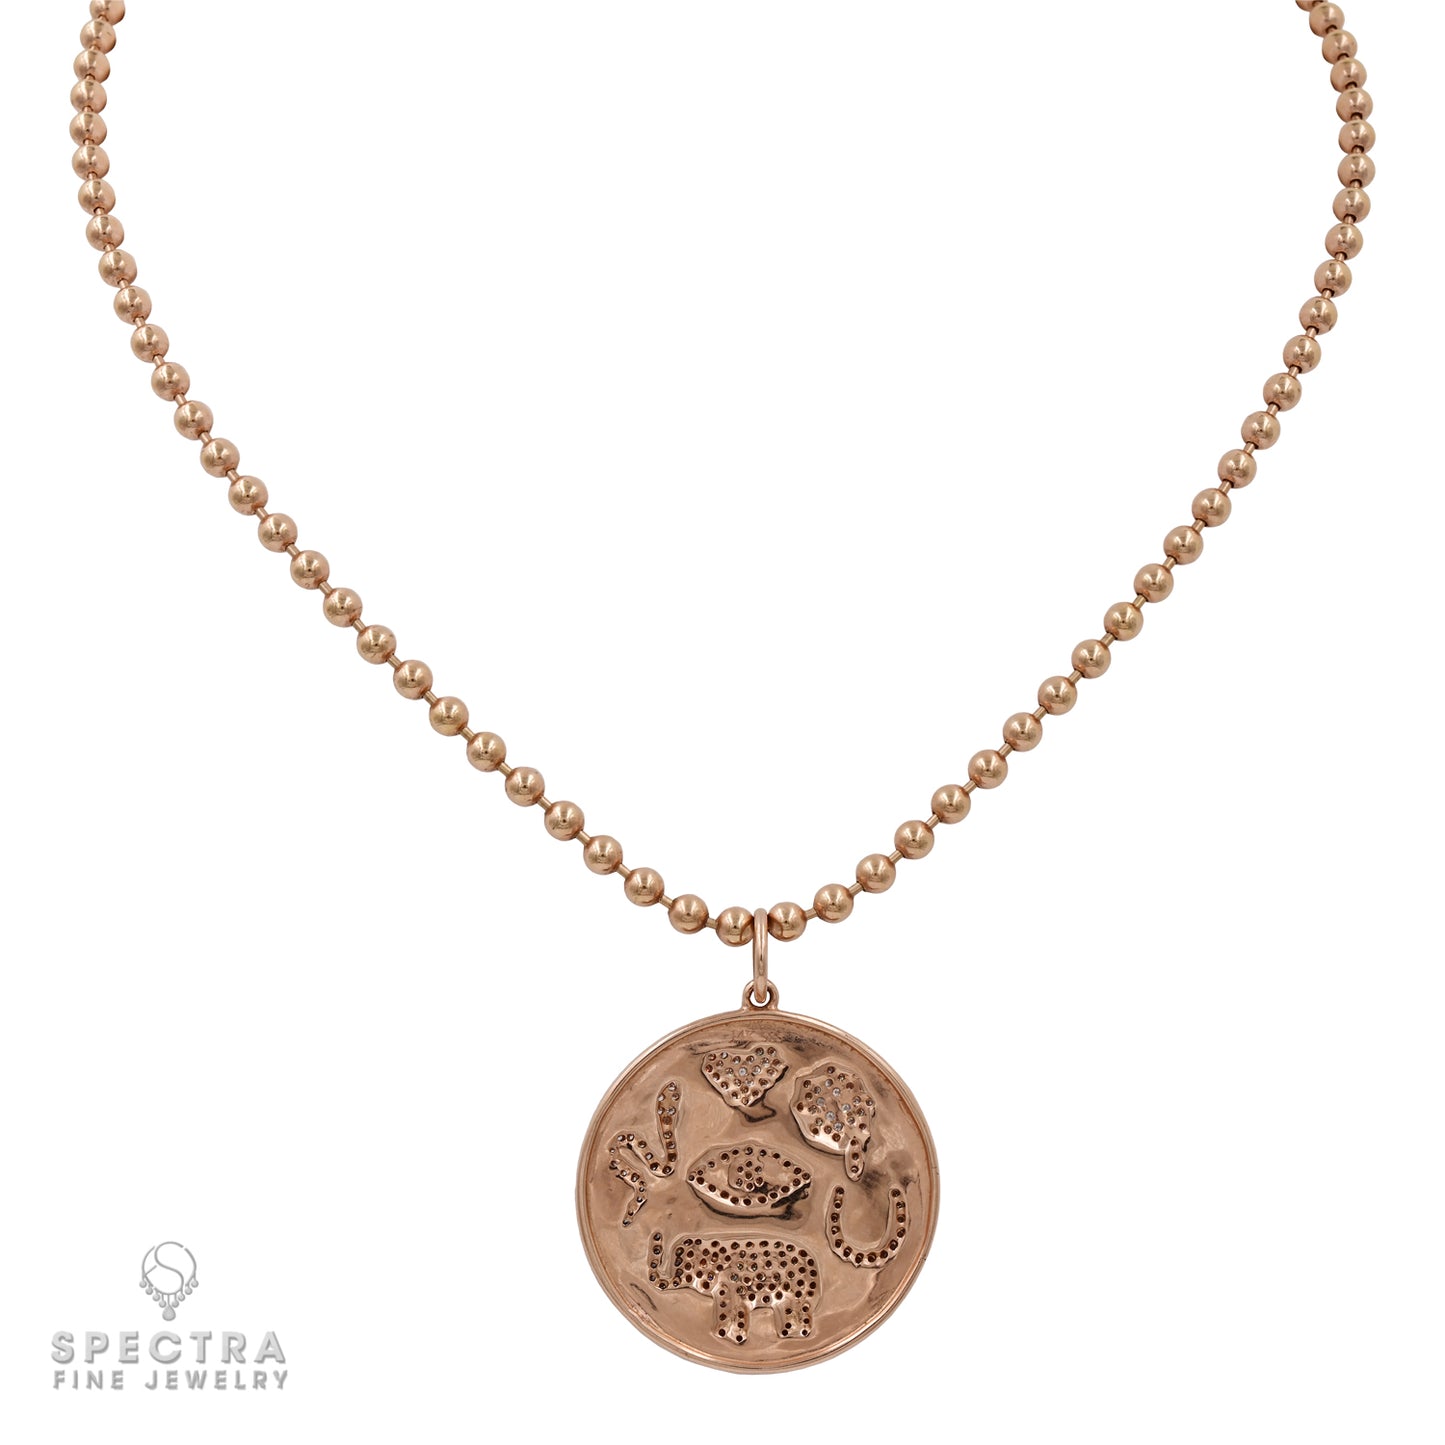 Radiant 14k Rose Gold Pendant Necklace with Pave Diamonds | Exquisite Jewelry for Every Occasion